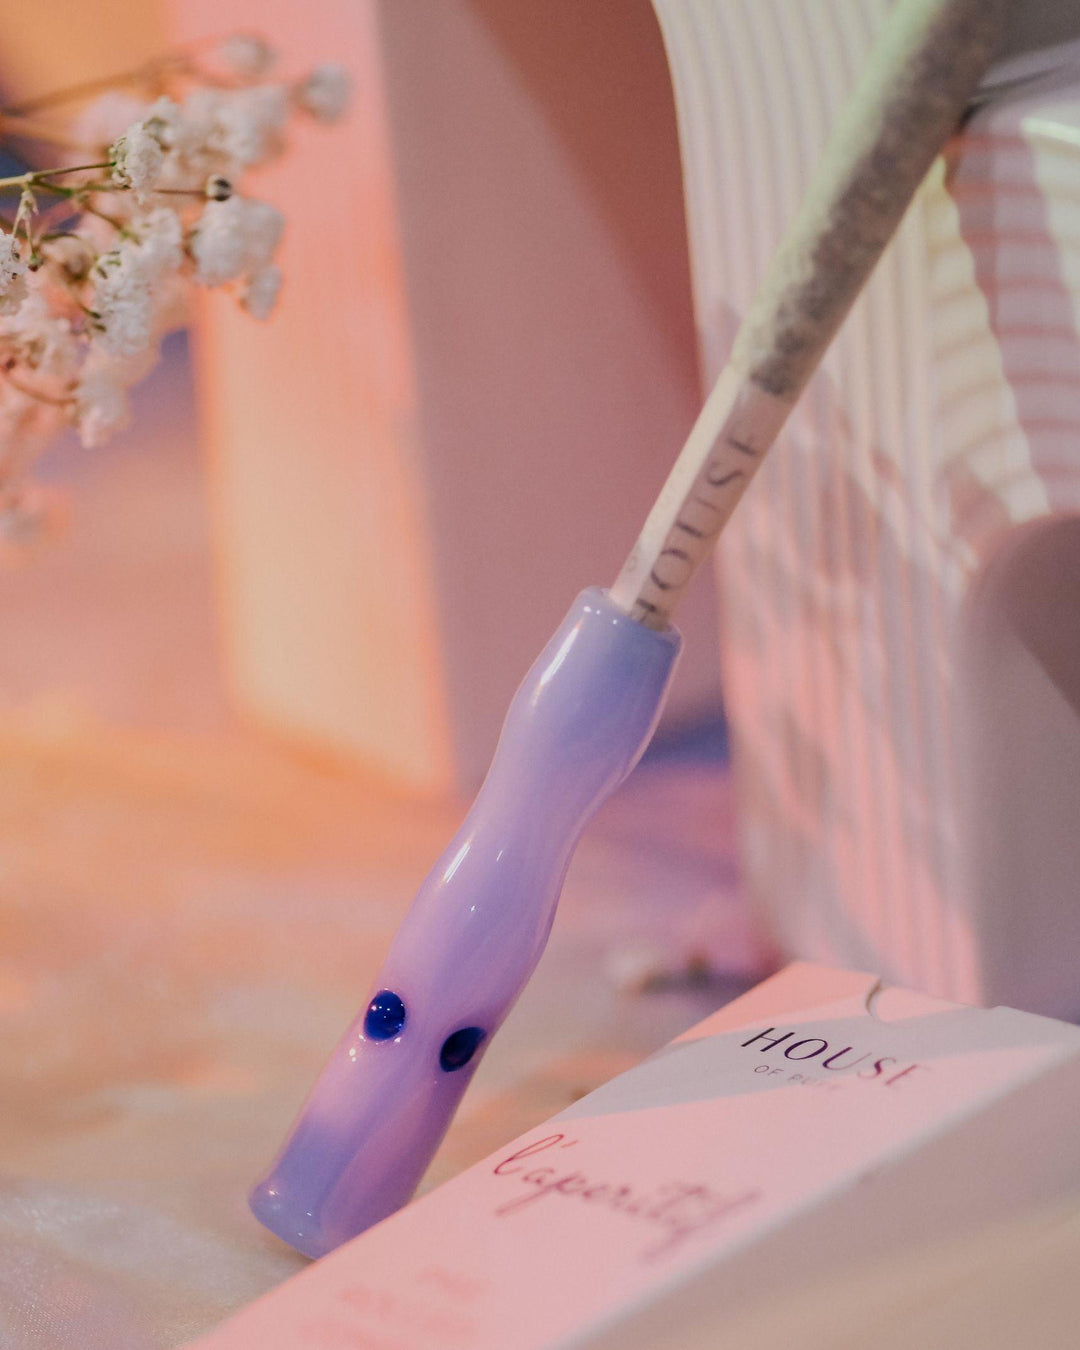 House of Puff Cigarette Holder in lavender with cannabis joint.